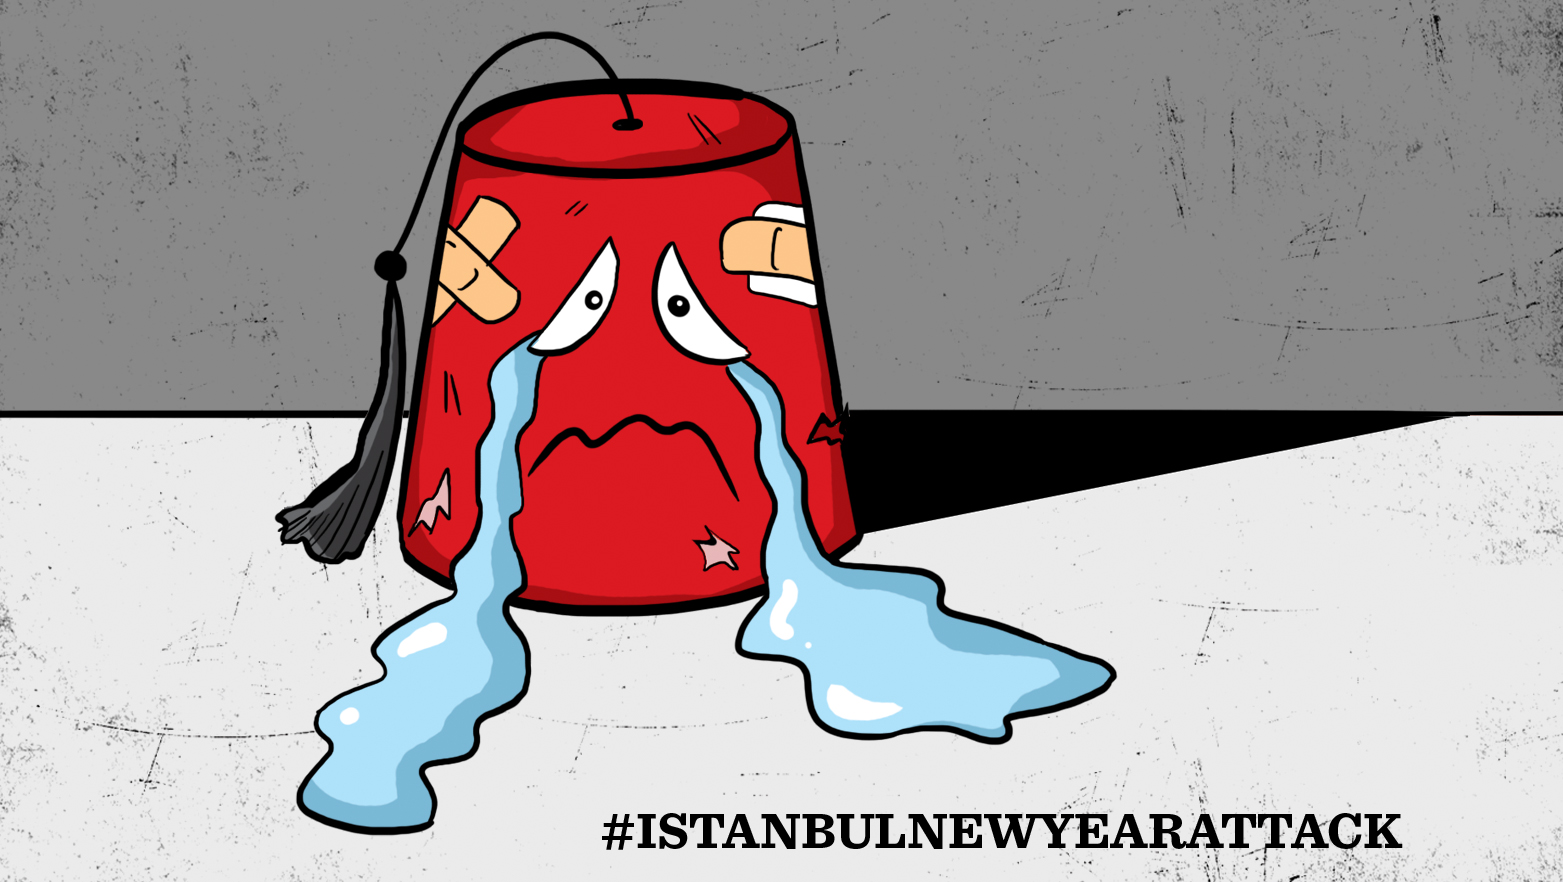 Istanbul New Year attack